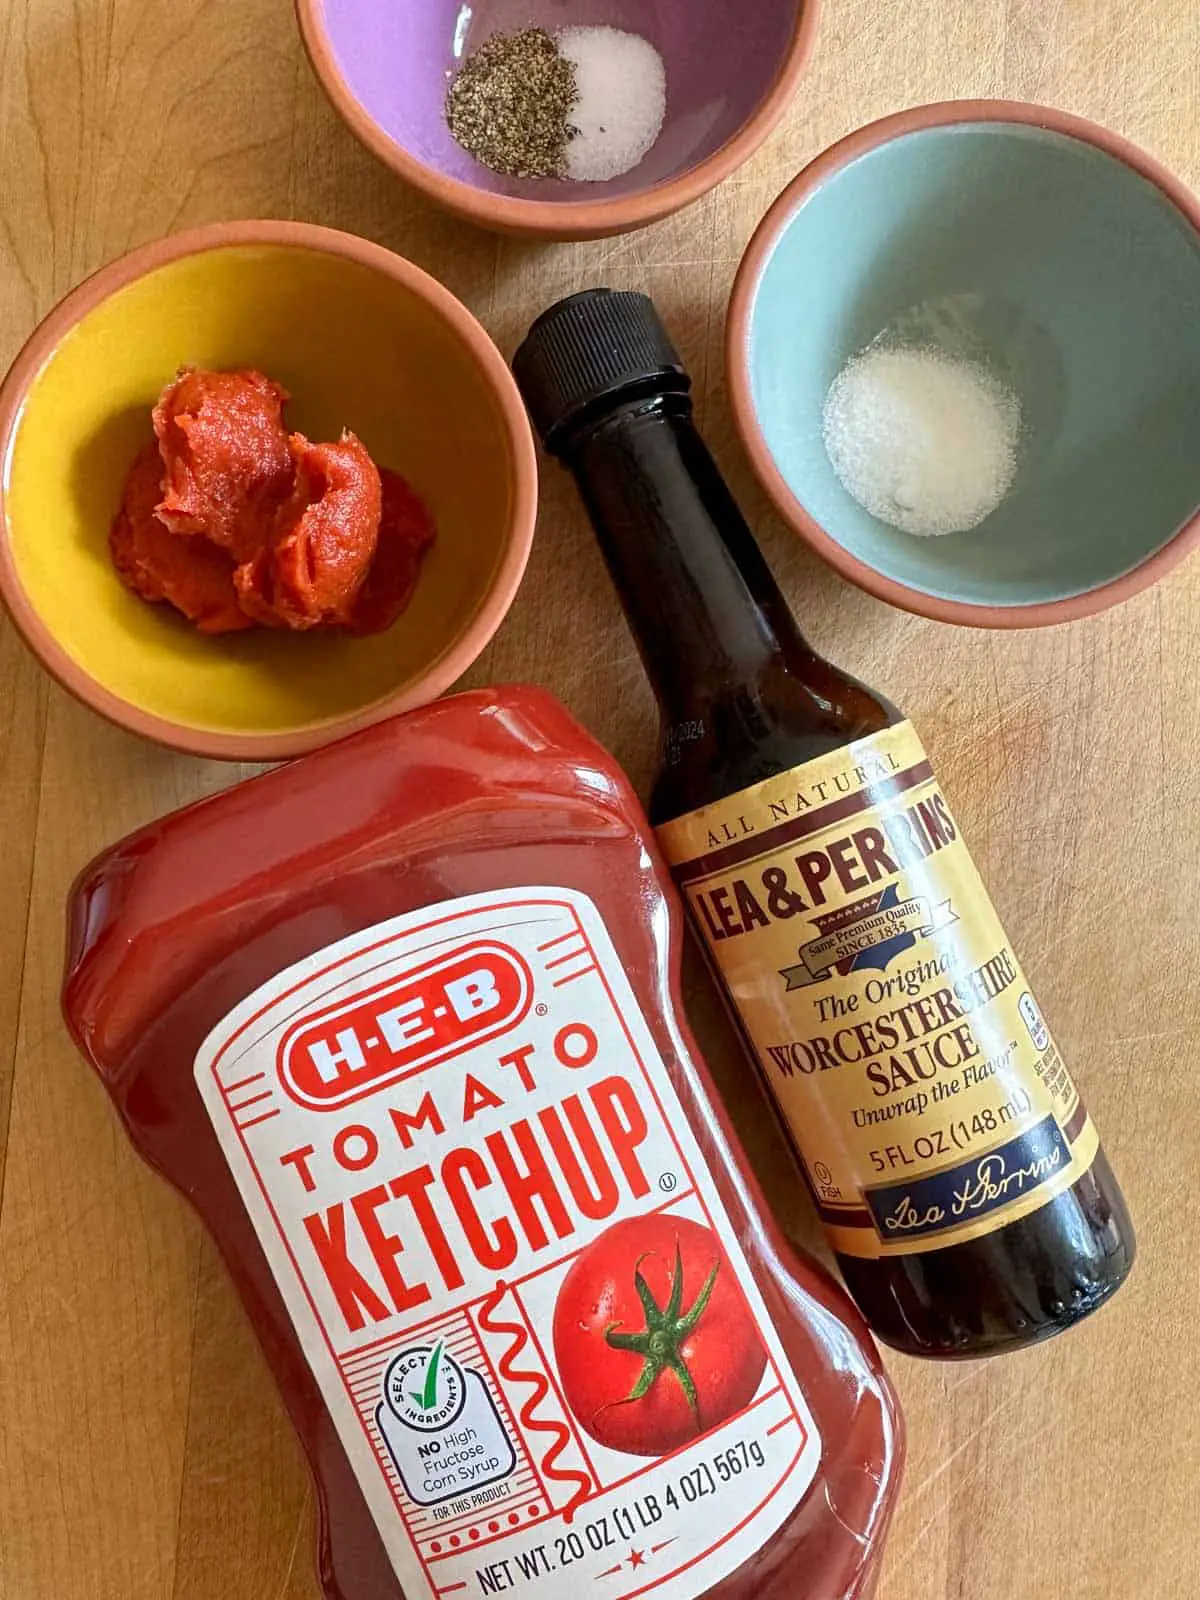 Bottle of ketchup, bottle of Worcestershire sauce, and bowls containing tomato paste, sugar, and salt and pepper.